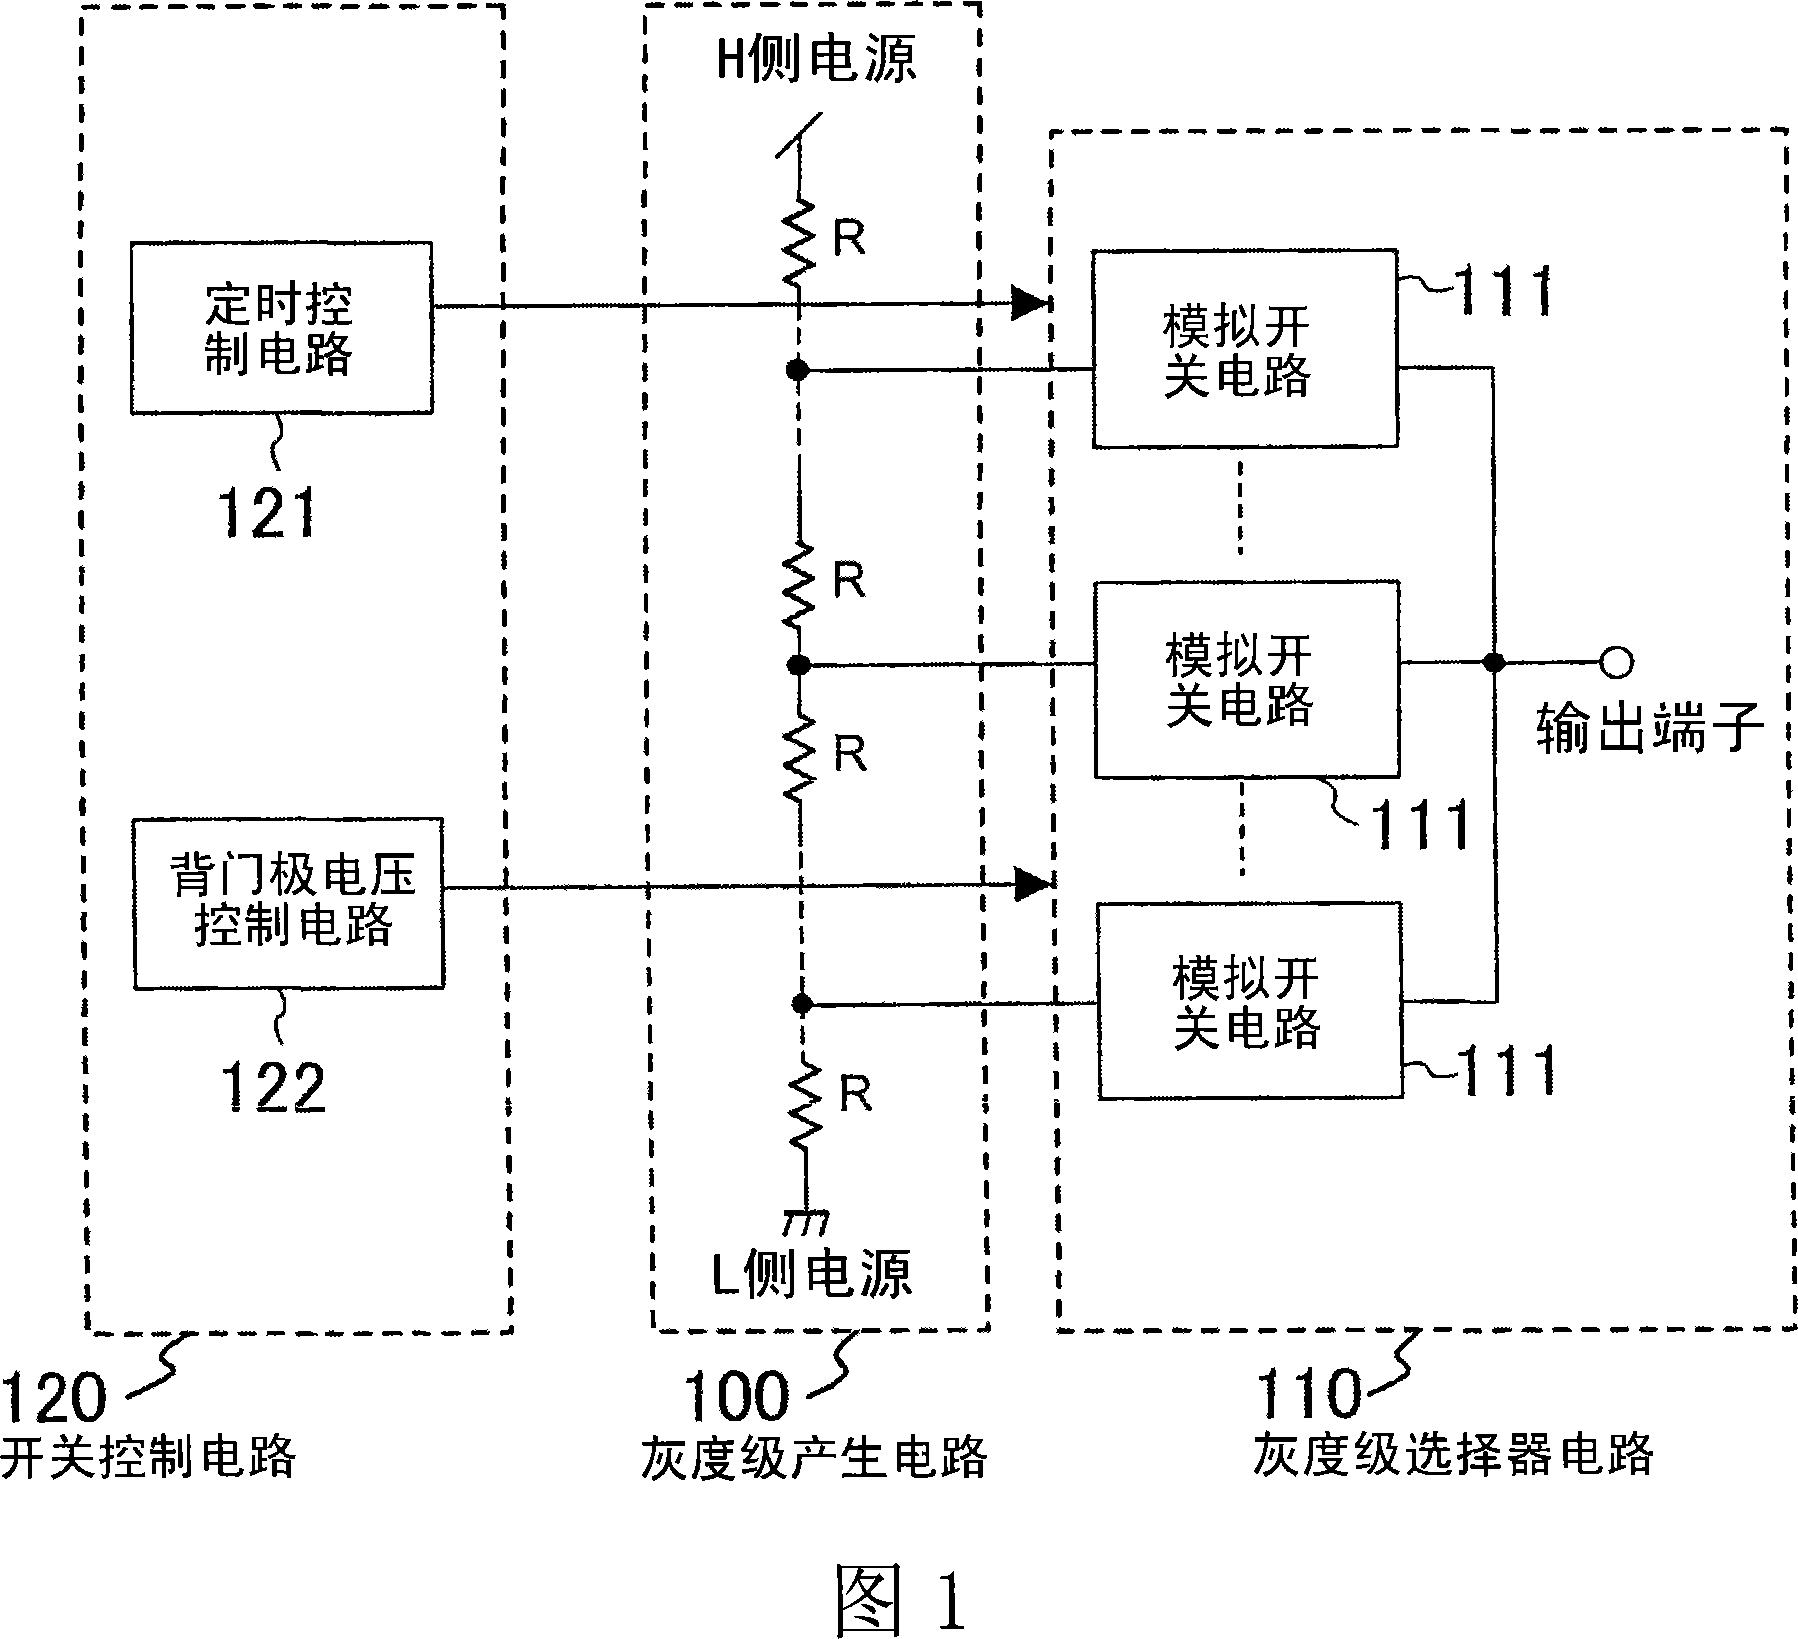 Semiconductor switch